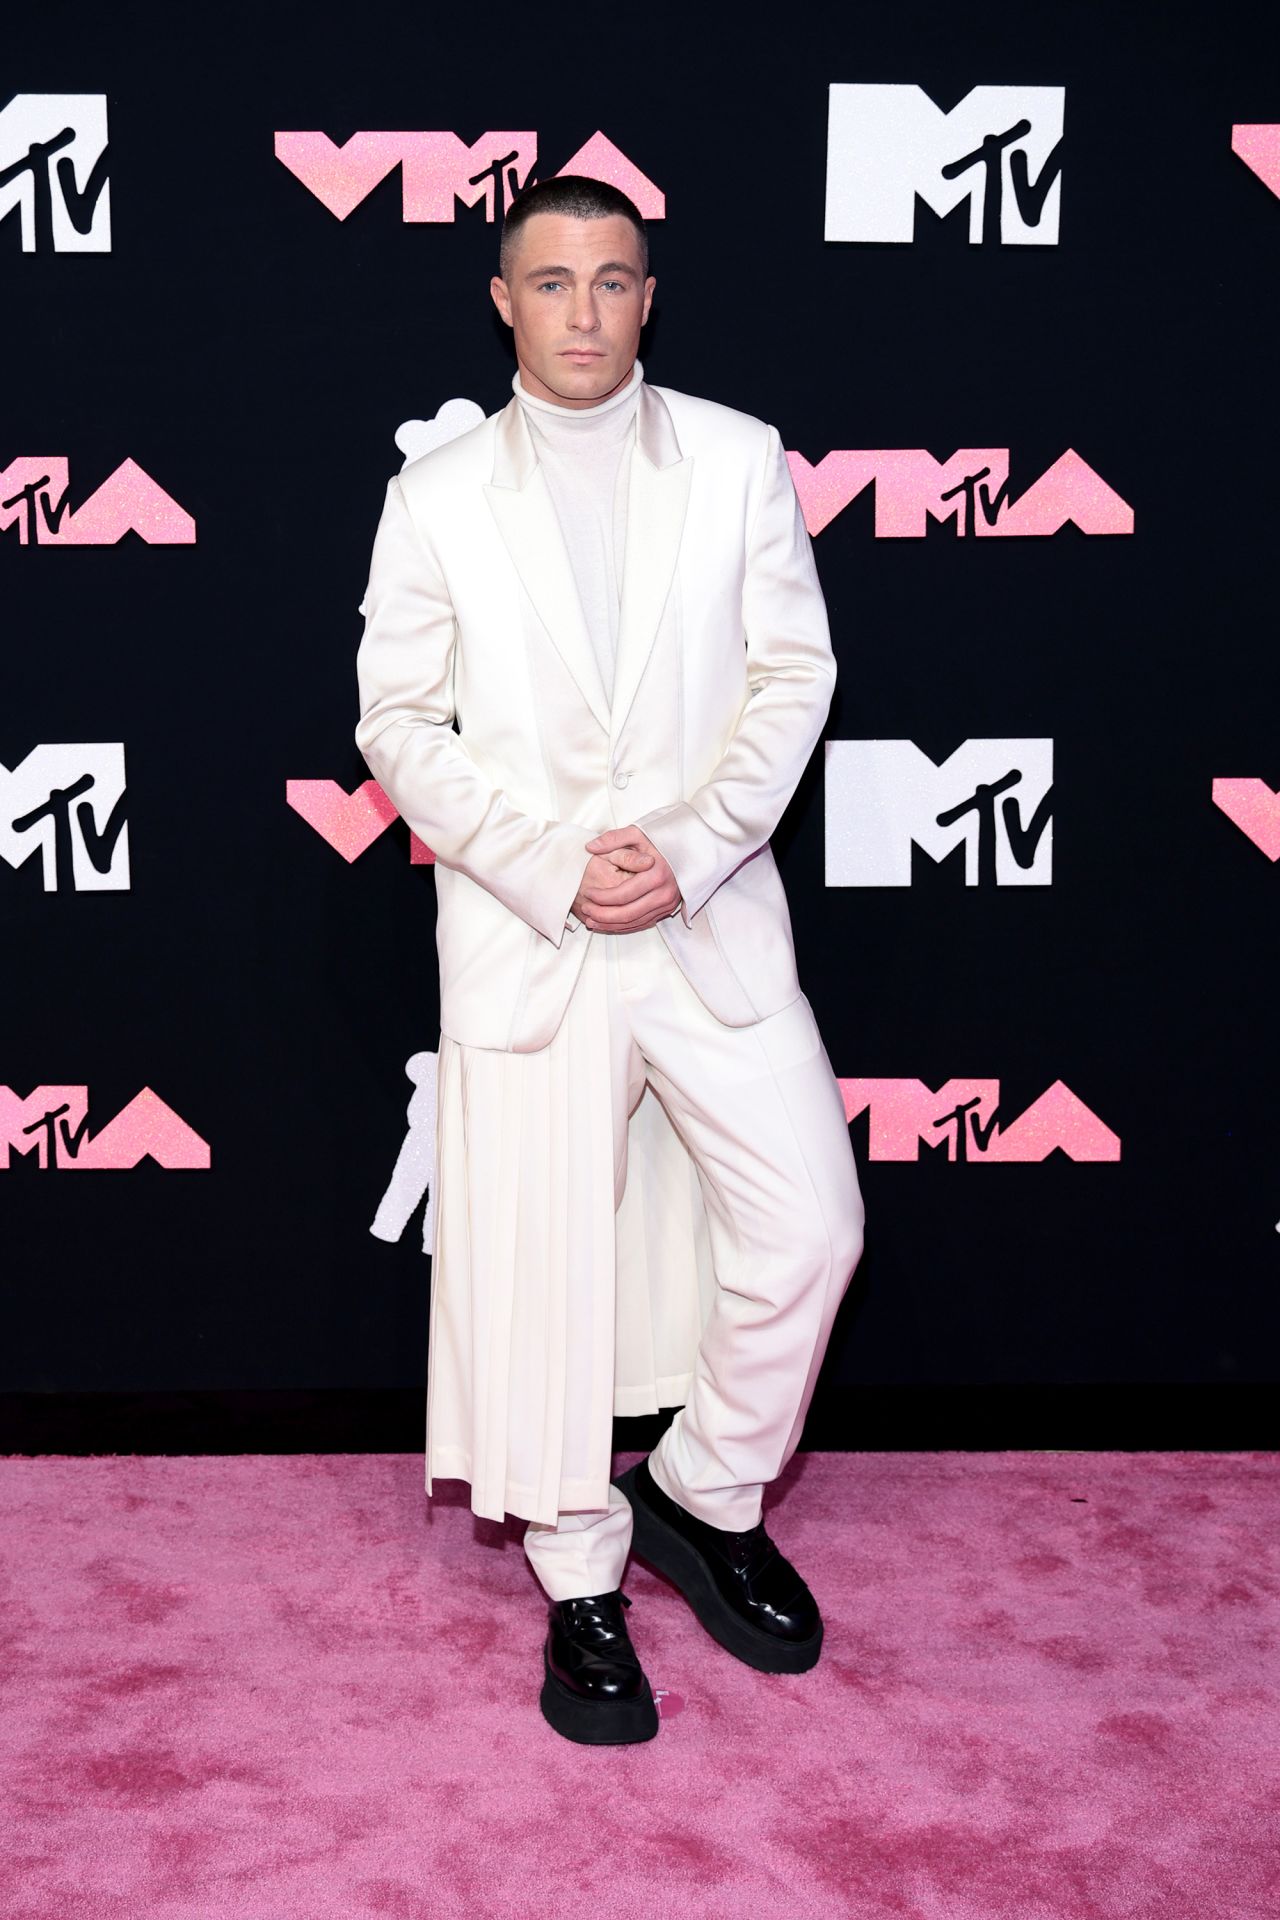 Actor and model Colton Haynes wore an all-white Dior outfit.